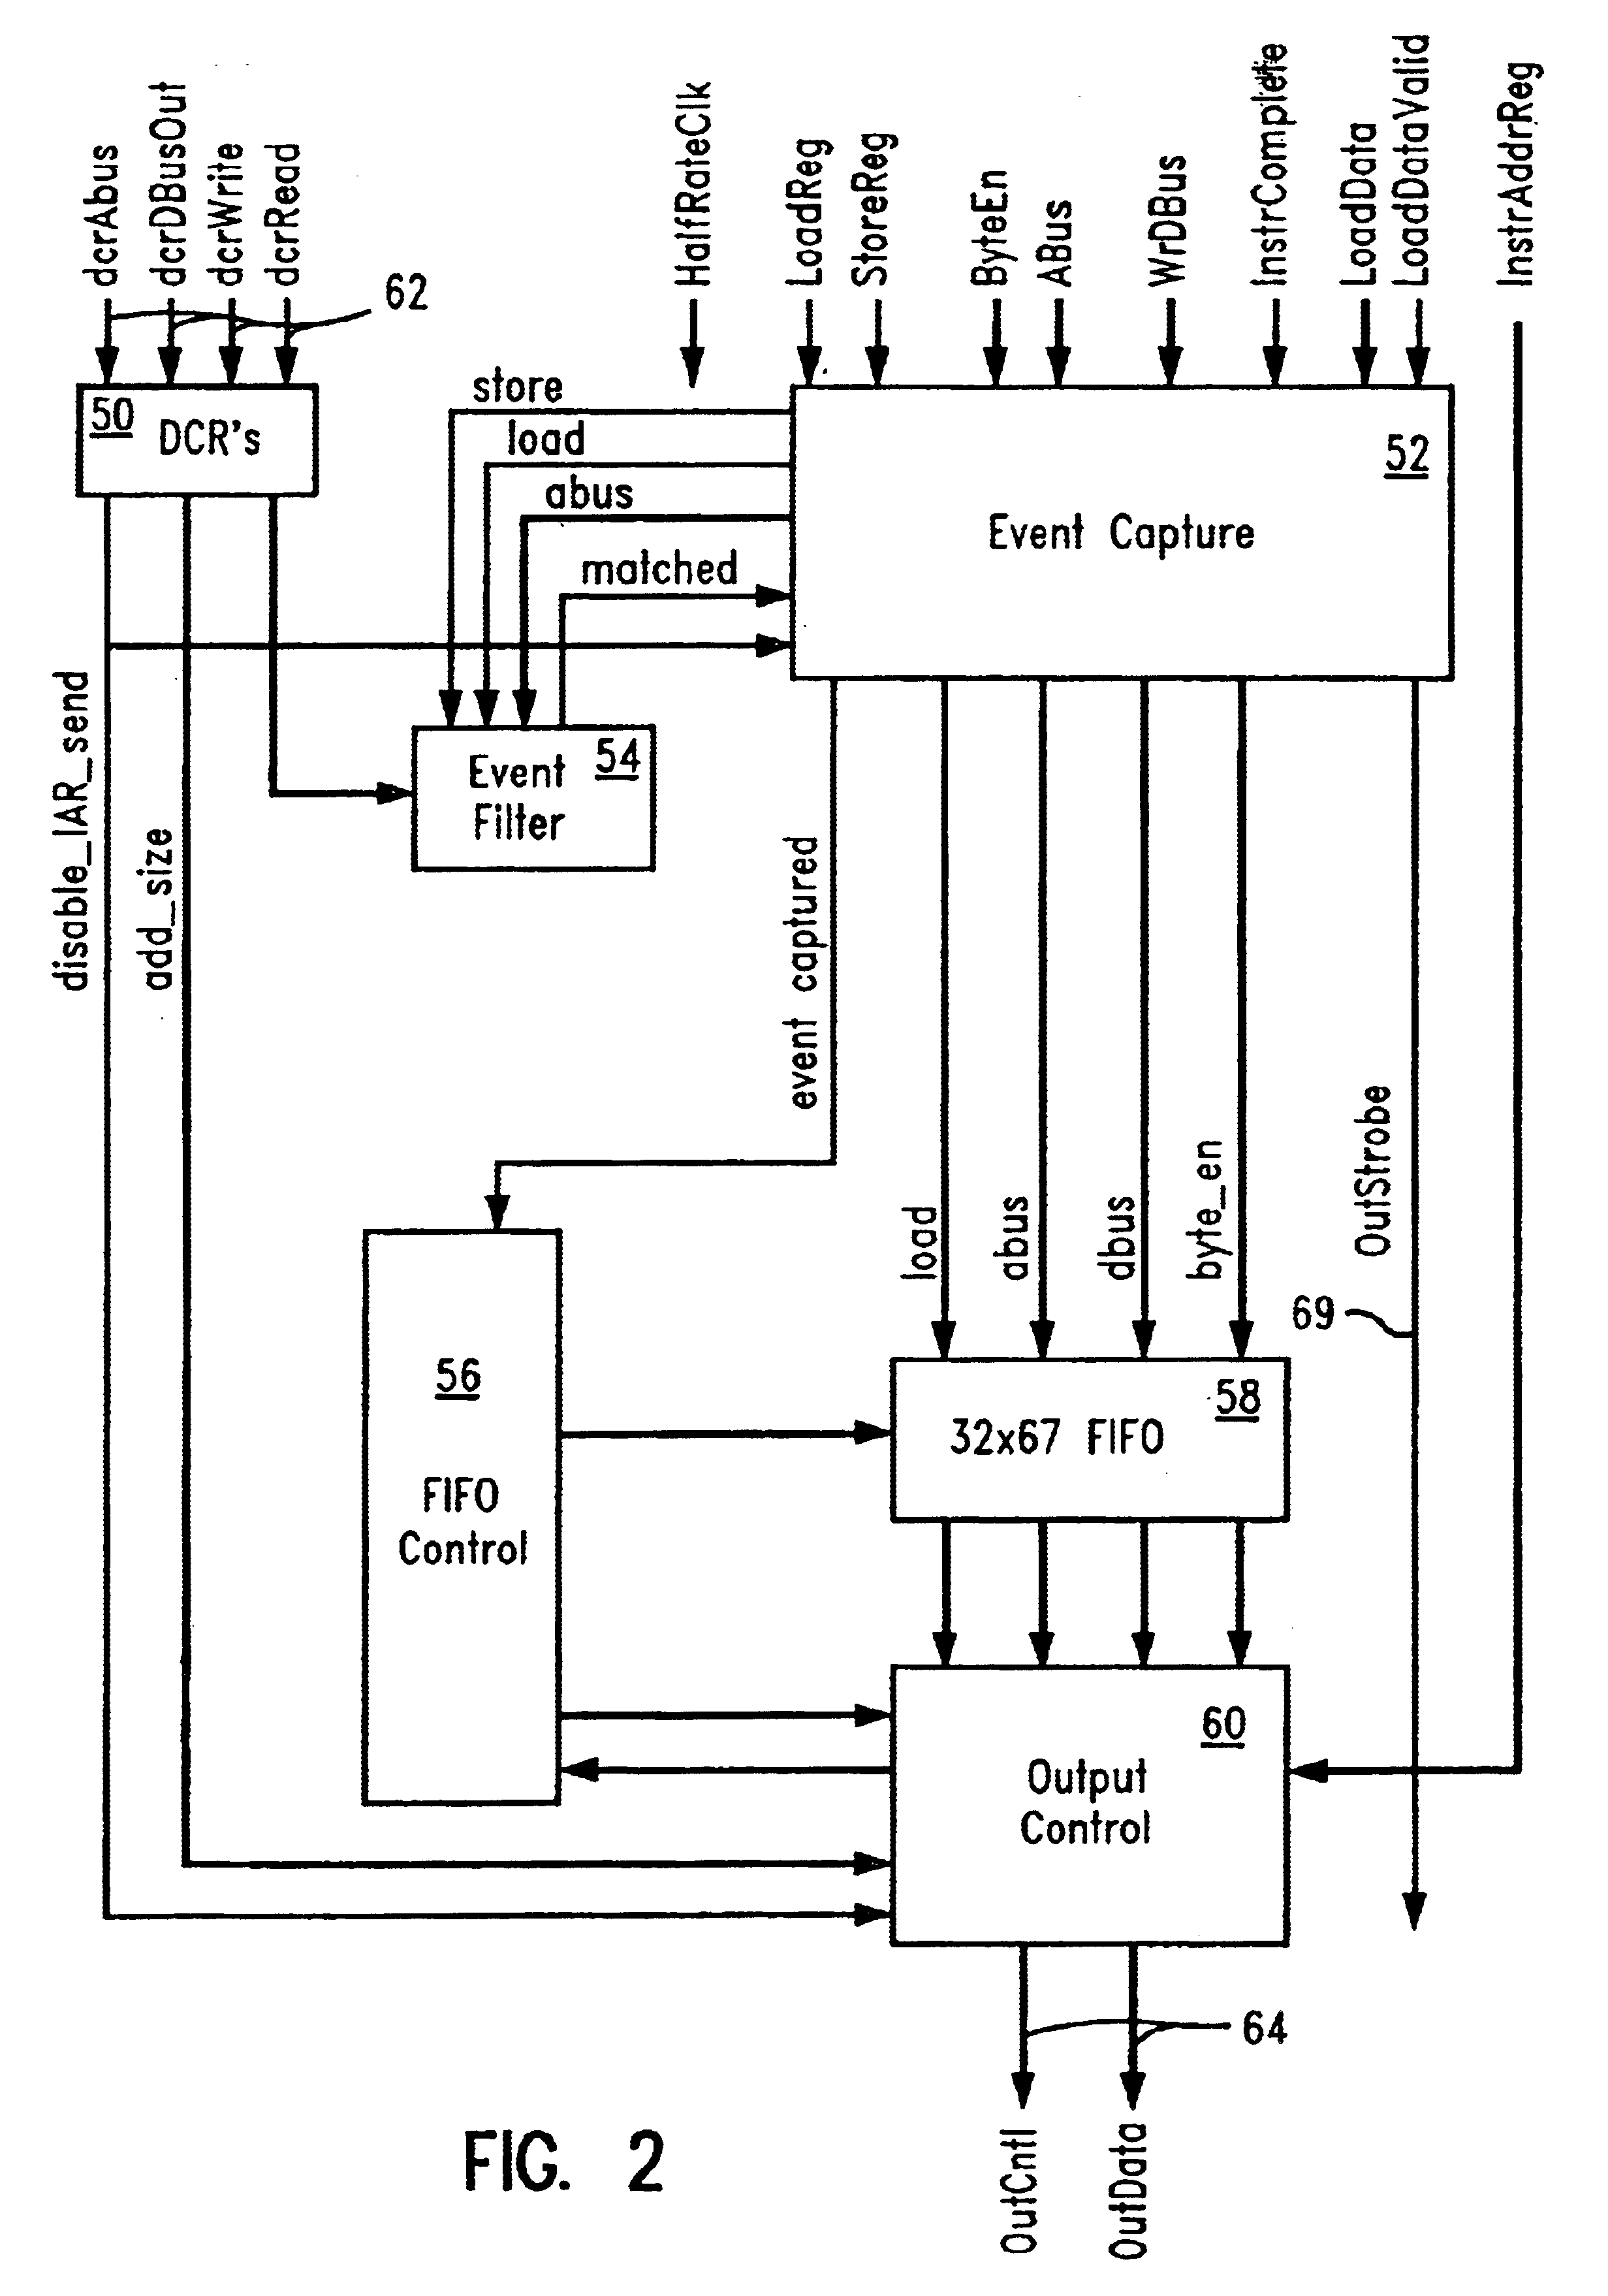 Integrated real-time data tracing with low pin count output